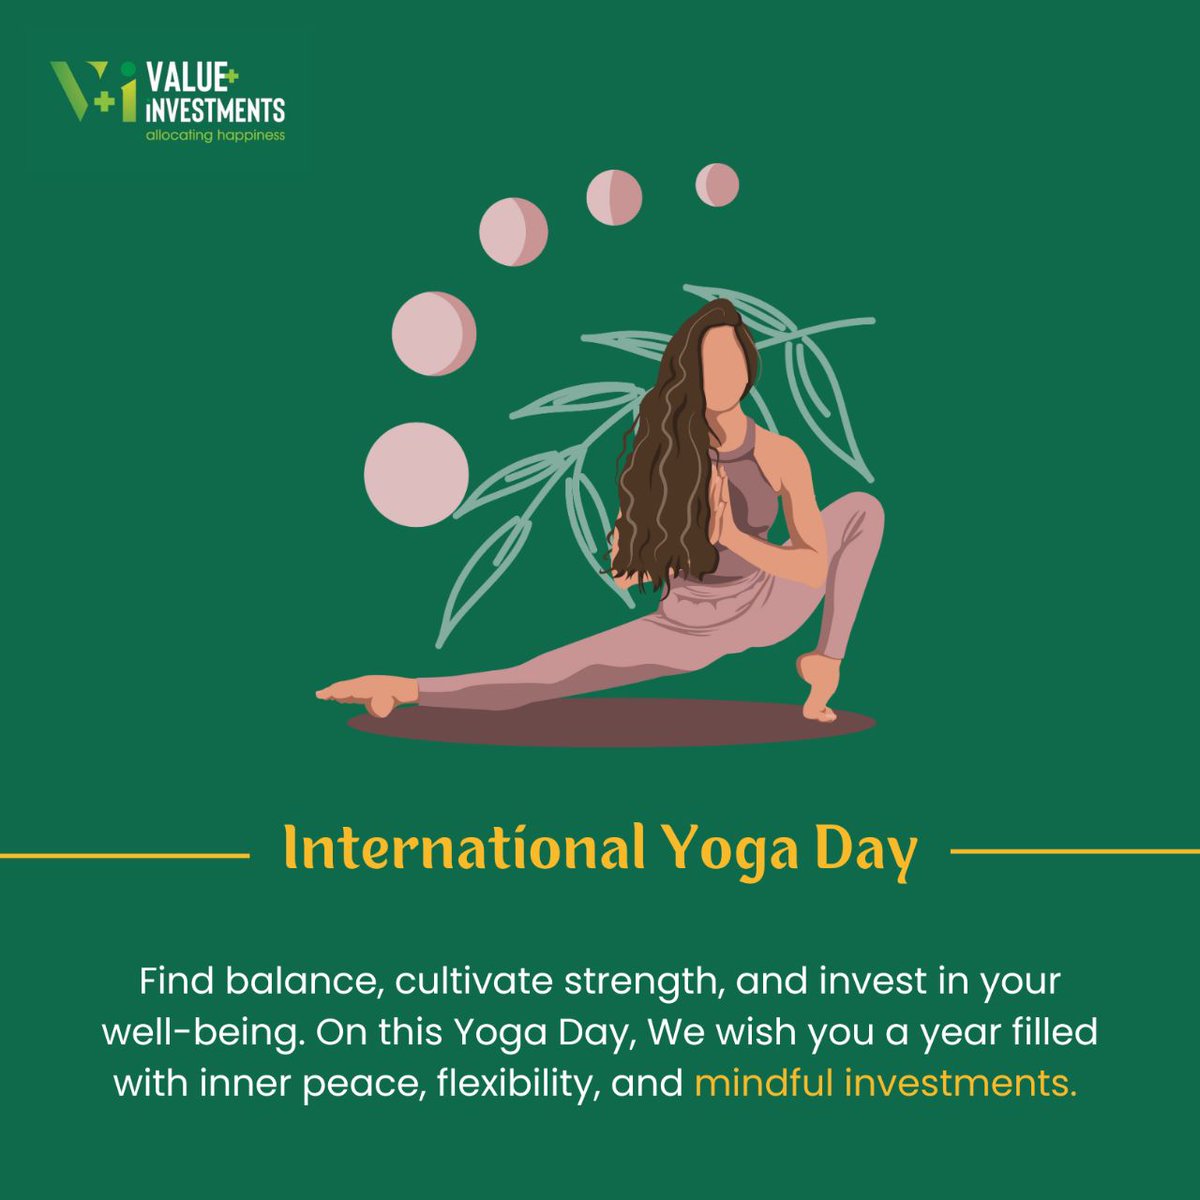 Find your inner balance and embrace the power of Yoga on this International Yoga Day! 
Wishing everyone a peaceful and rejuvenating International Yoga Day!🧘‍♂️
#ValuePlusInvestments
#InternationalYogaDay #InnerBalance #ValuePlusInvestments #WealthAndWellBeing #YogaLove #YogaJourney